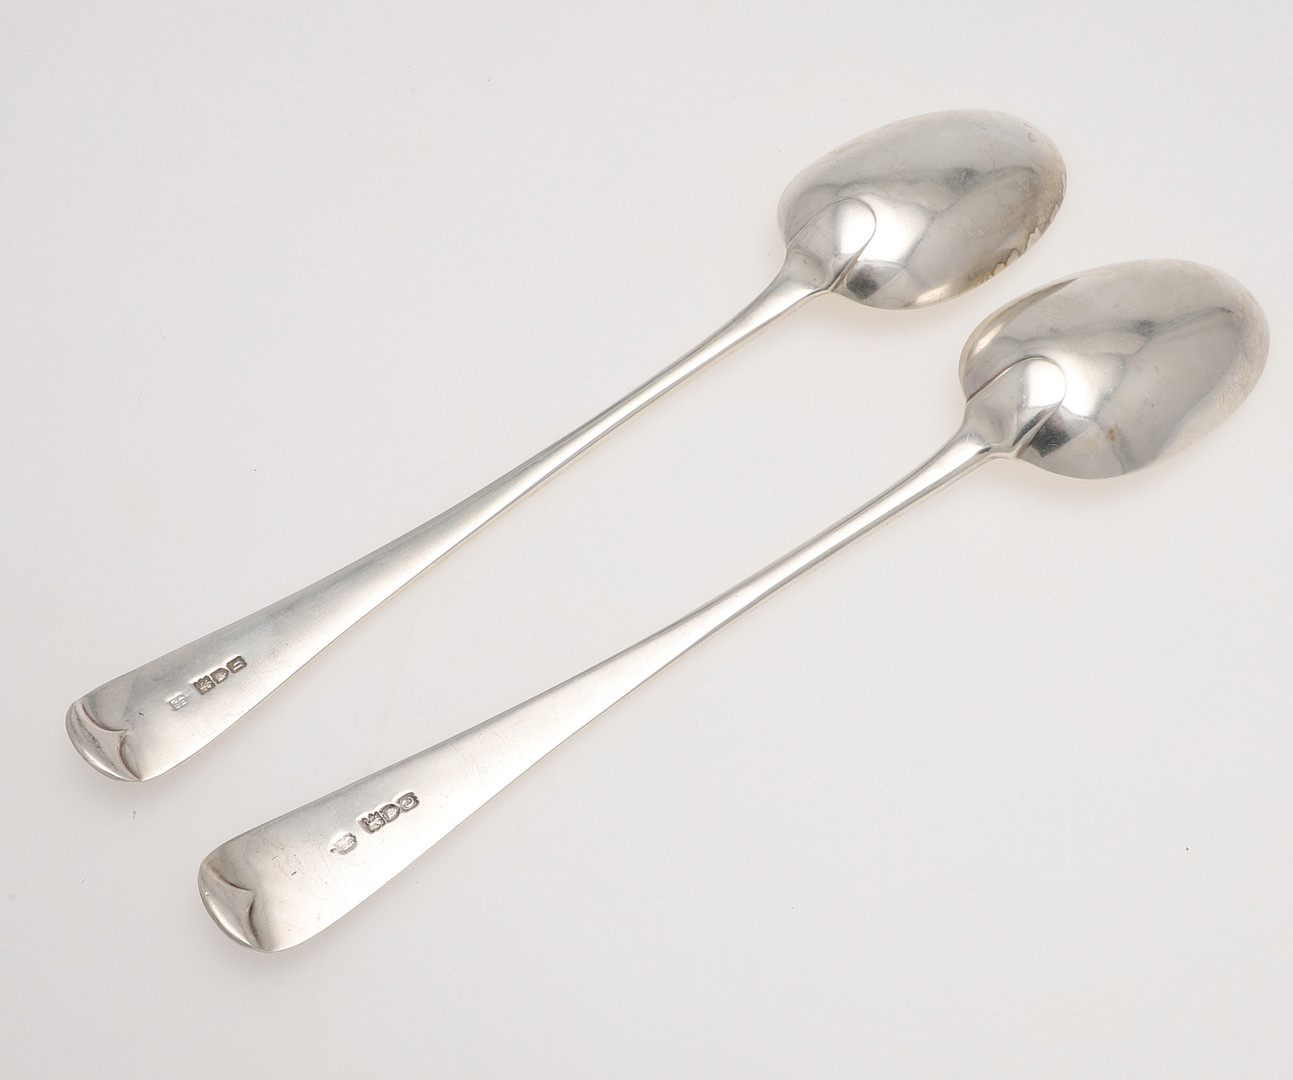 A NEAR PAIR OF LATE VICTORIAN/ EDWARDIAN SILVER SERVING OR BASTING SPOONS. - Image 4 of 5